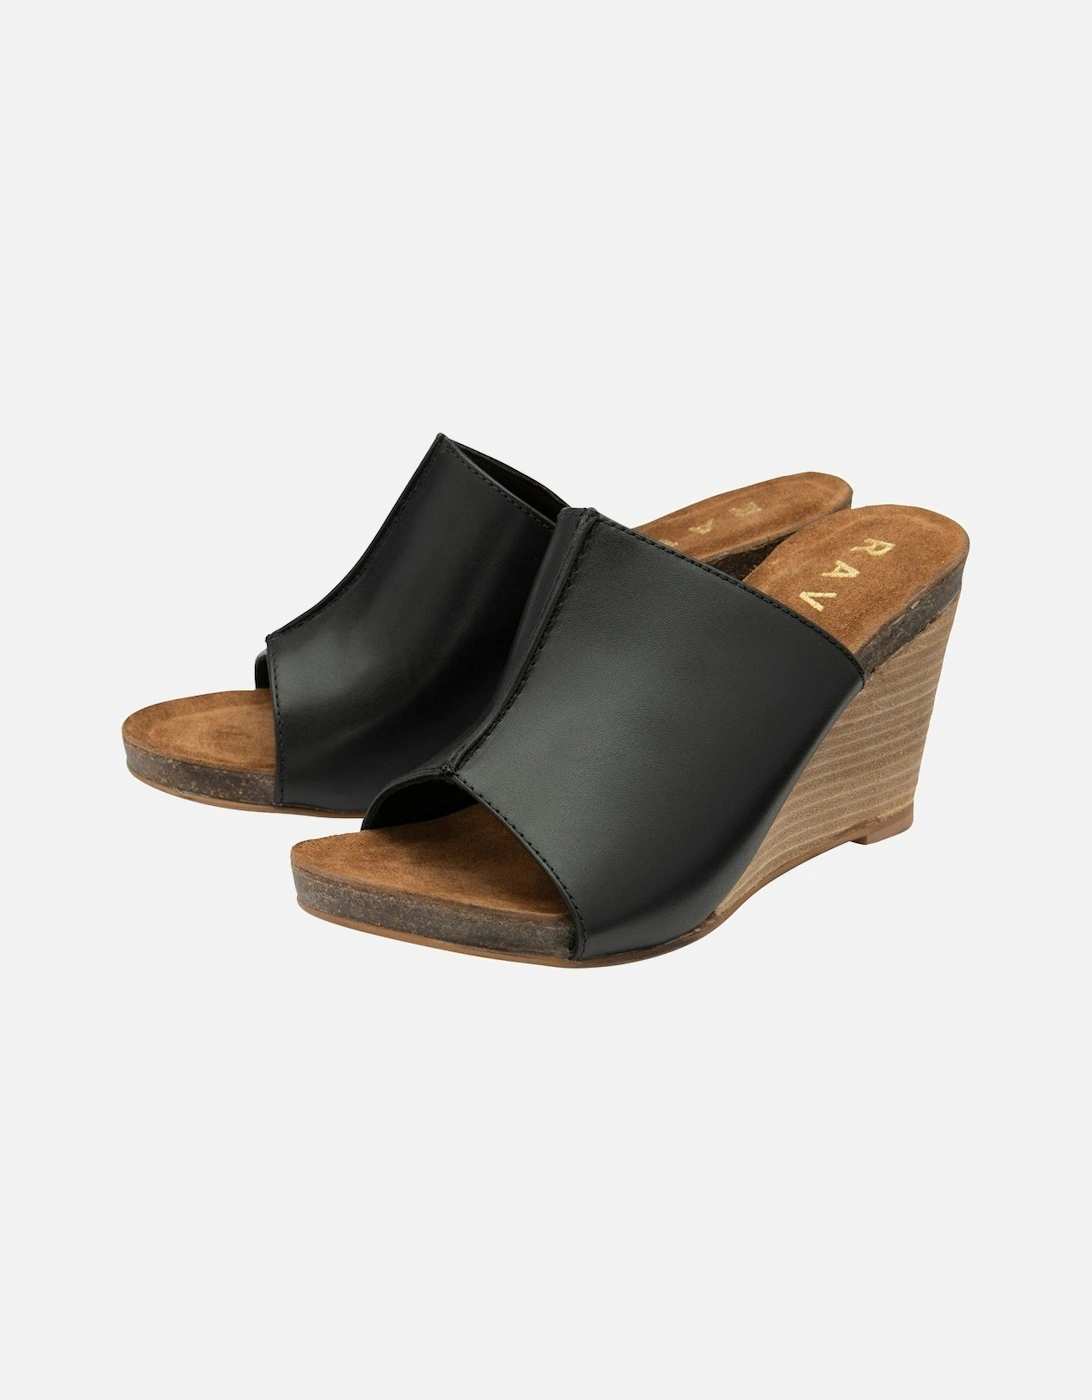 Corby Womens Wedge Sandals